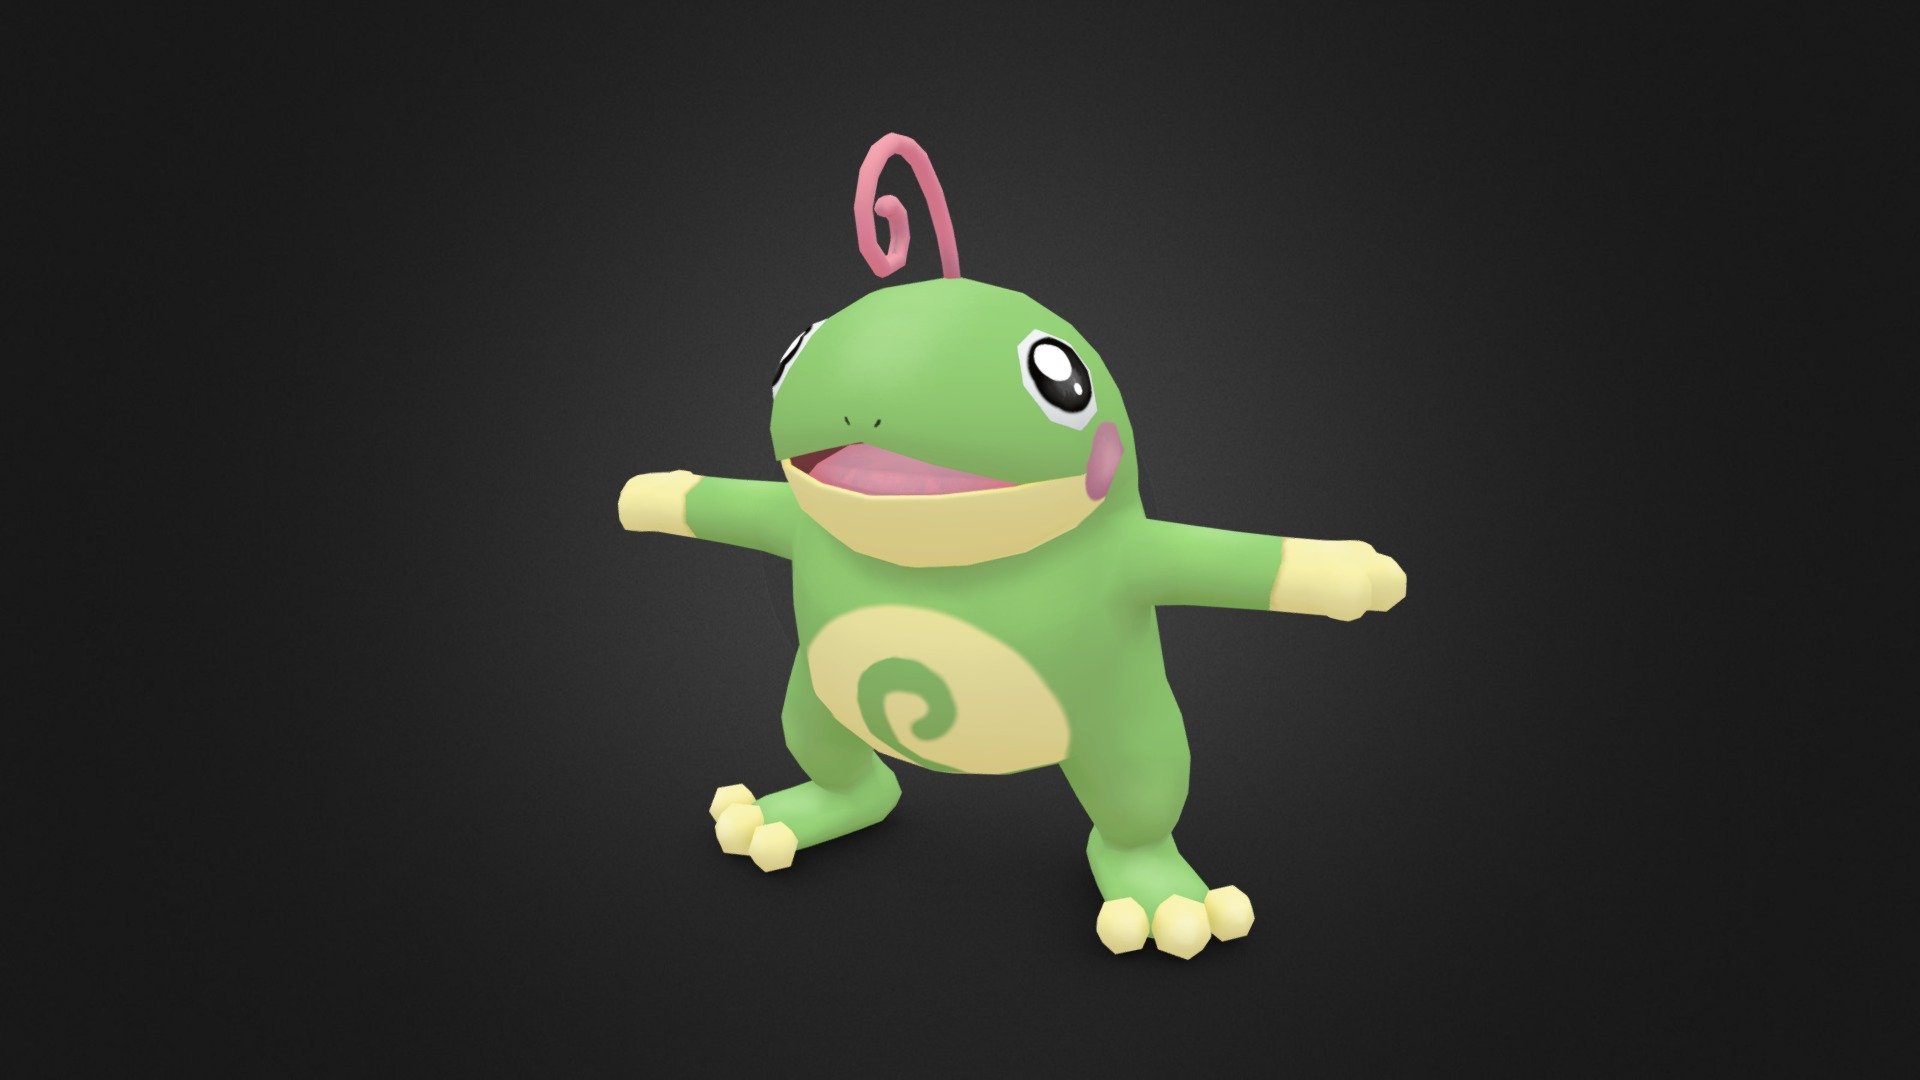 Politoed Hd Wallpapers